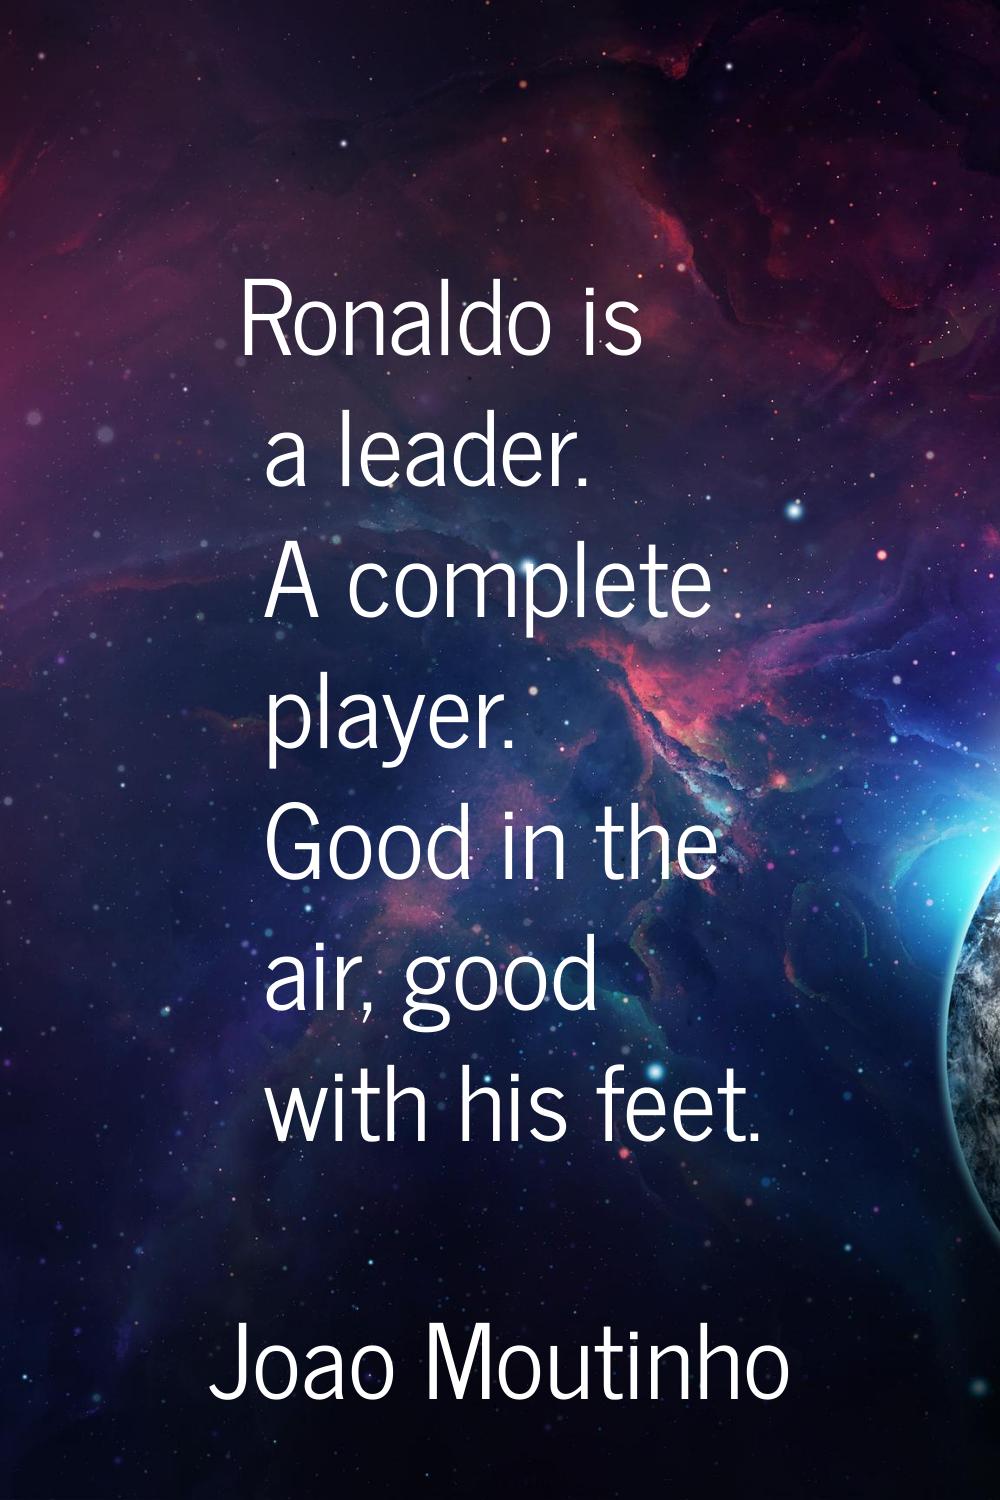 Ronaldo is a leader. A complete player. Good in the air, good with his feet.